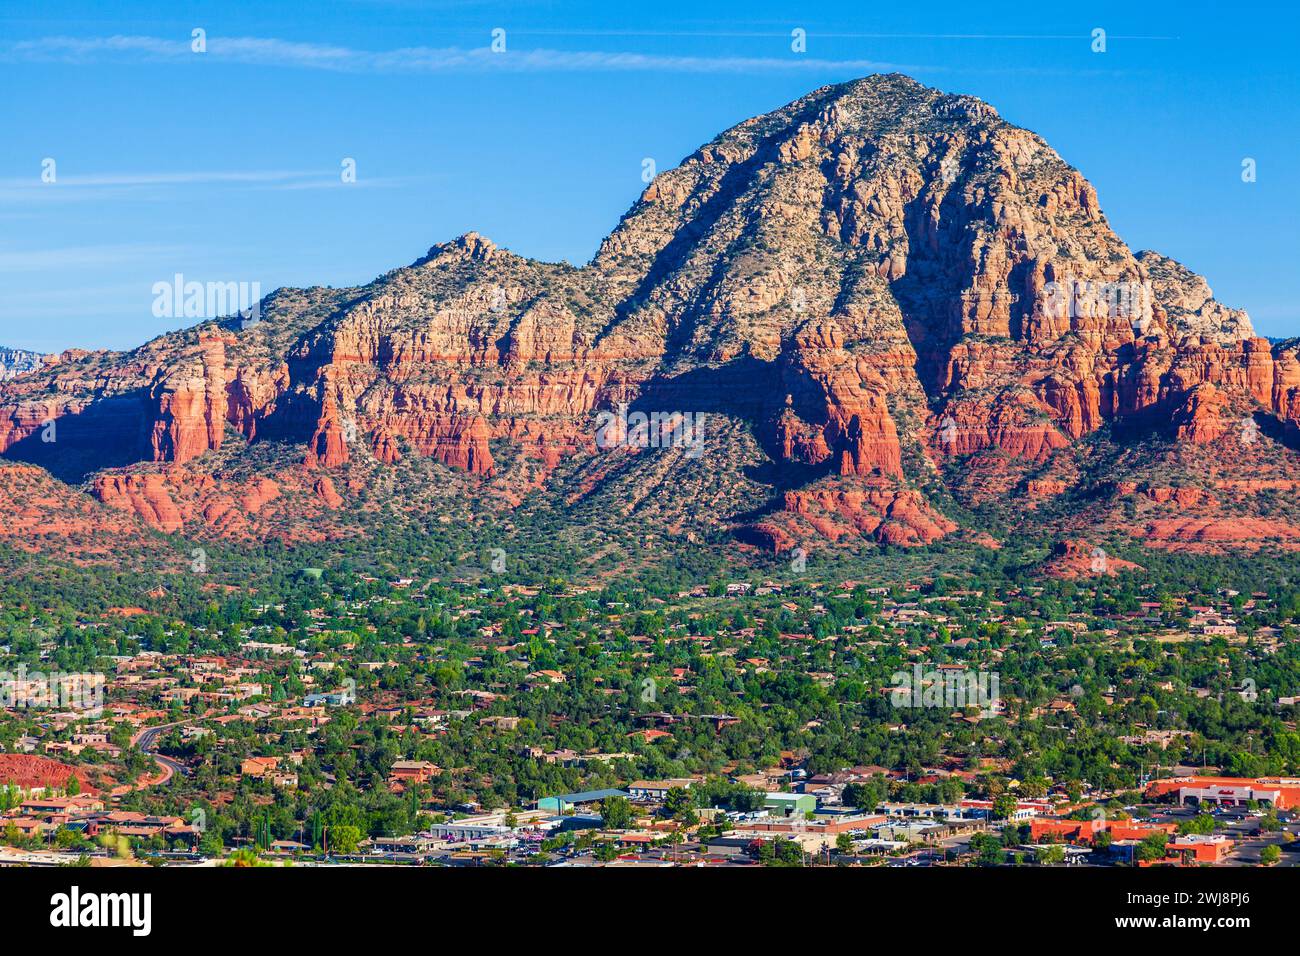 Thunder Mountain (also called Capitol Butte) overlooking the city of Sedona. Stock Photo